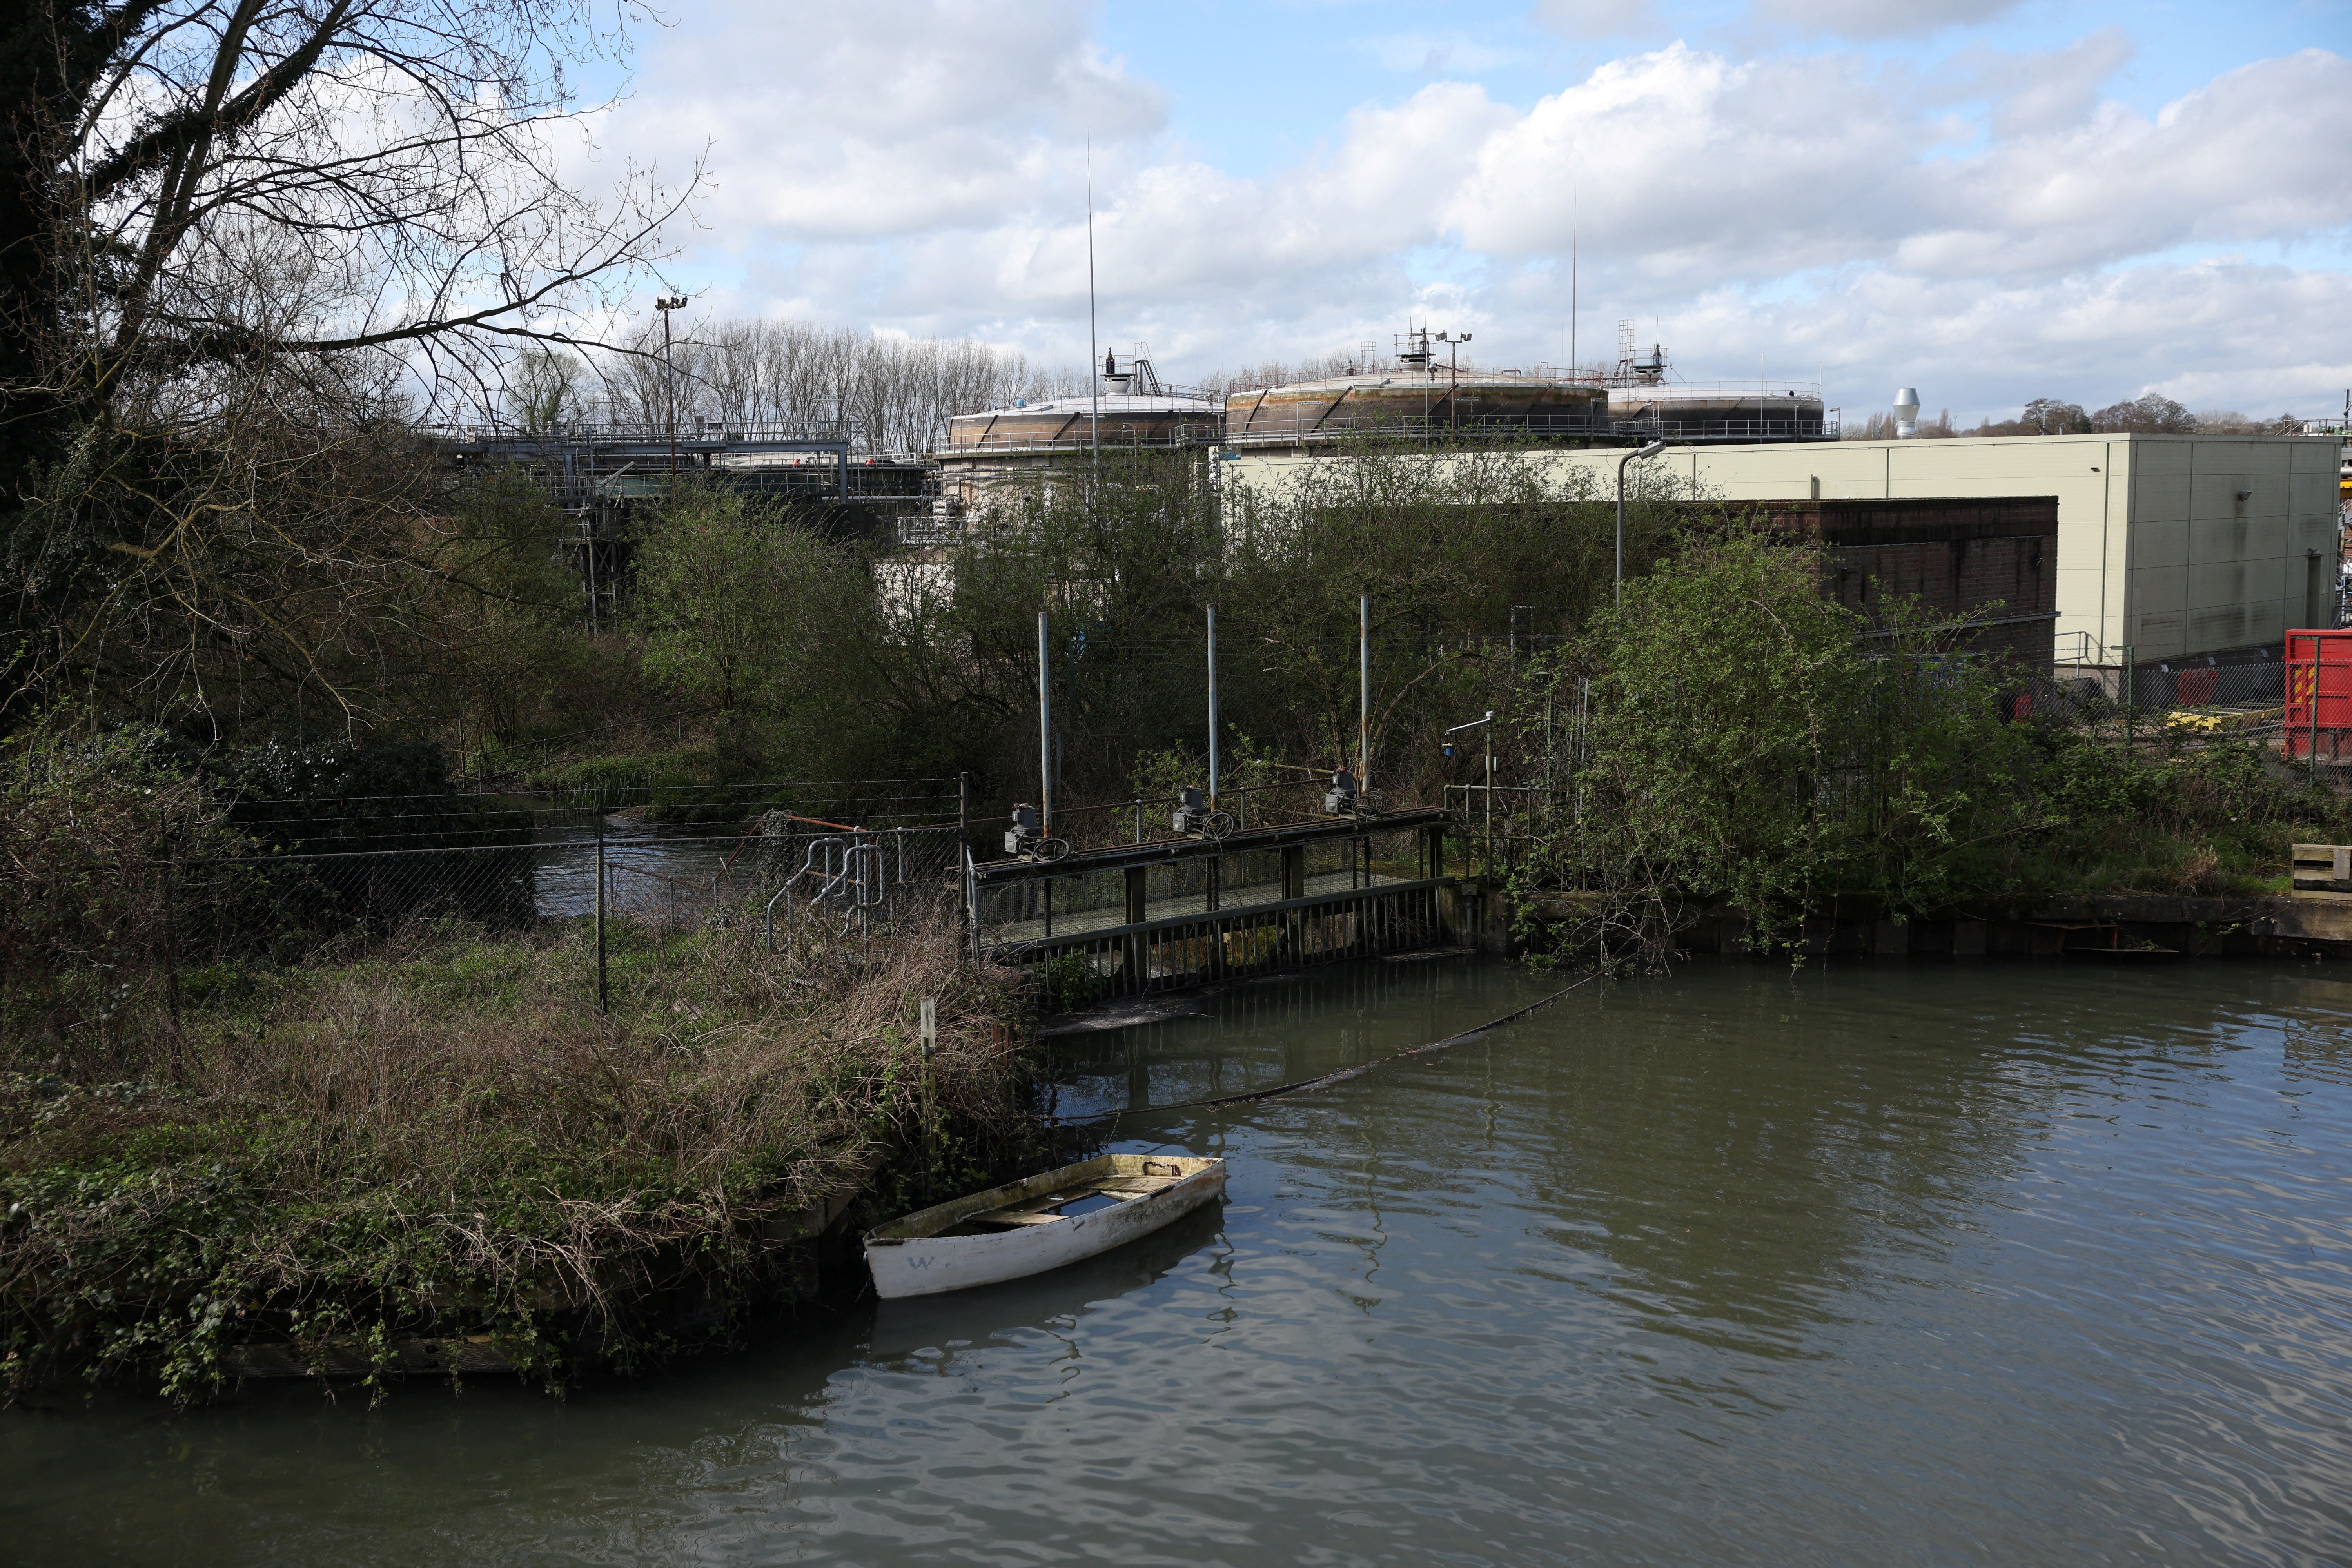 Thames Water’s sewage treatment works have come under scrutiny